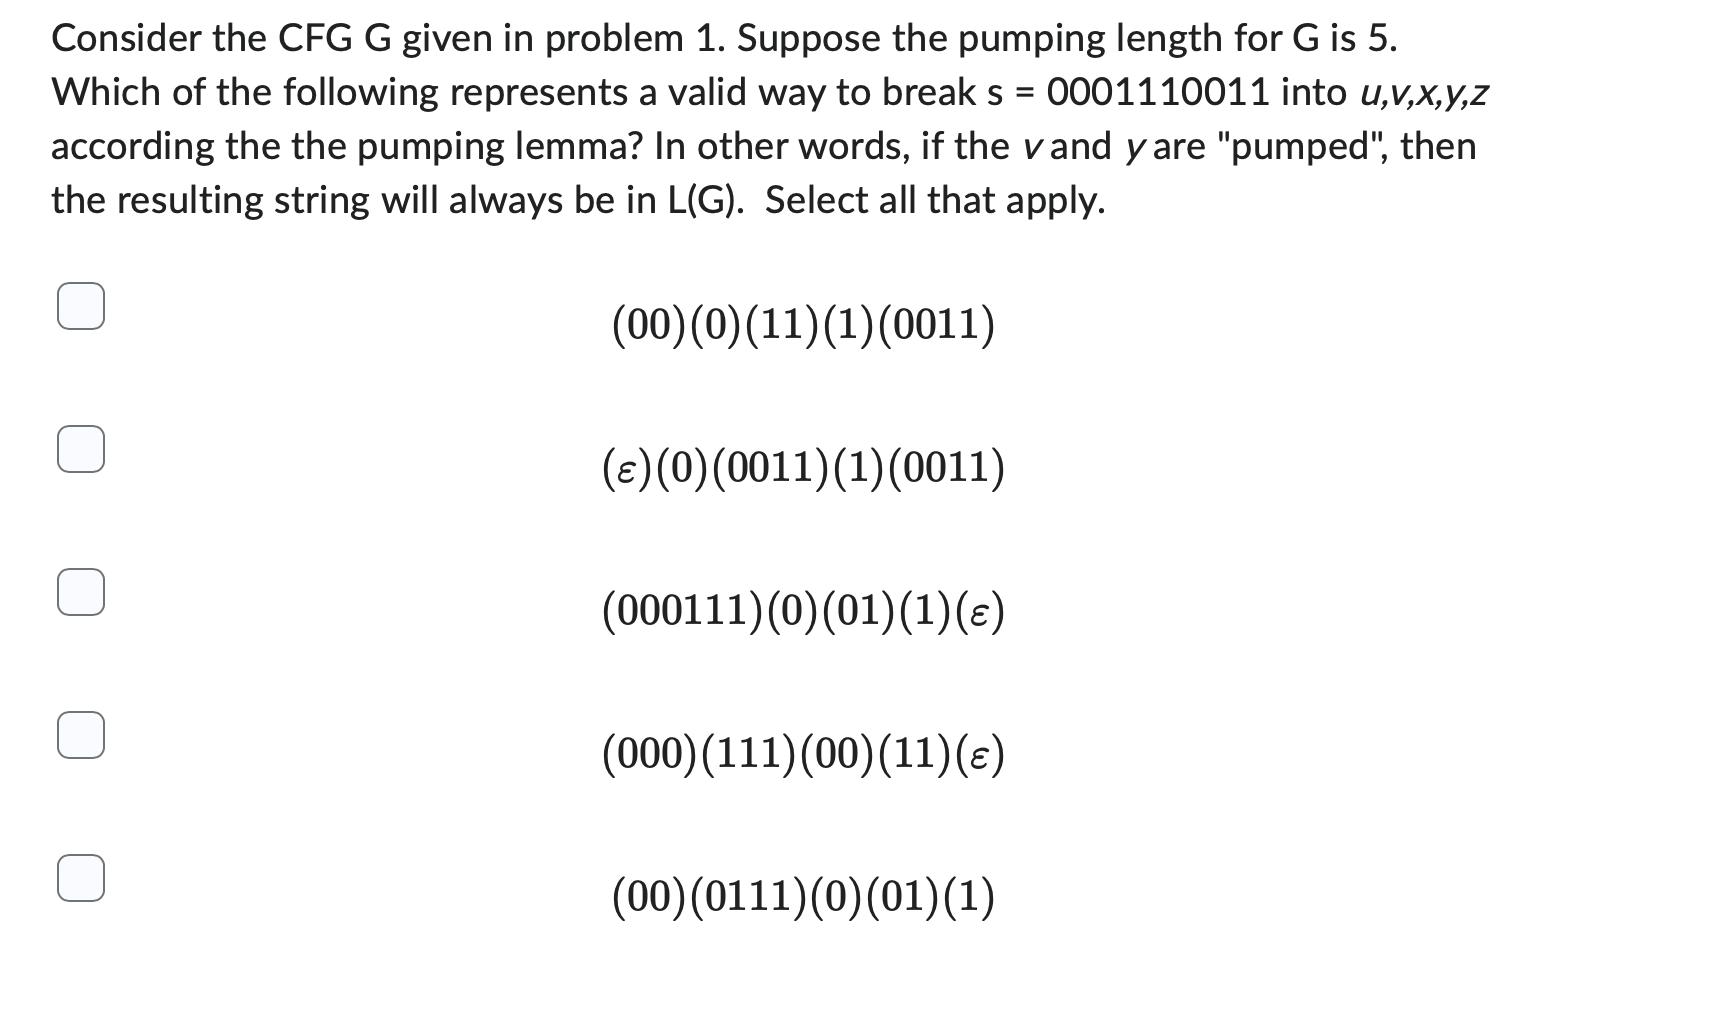 Consider the CFG G given in problem 1. Suppose the pumping length for G is 5. Which of the following